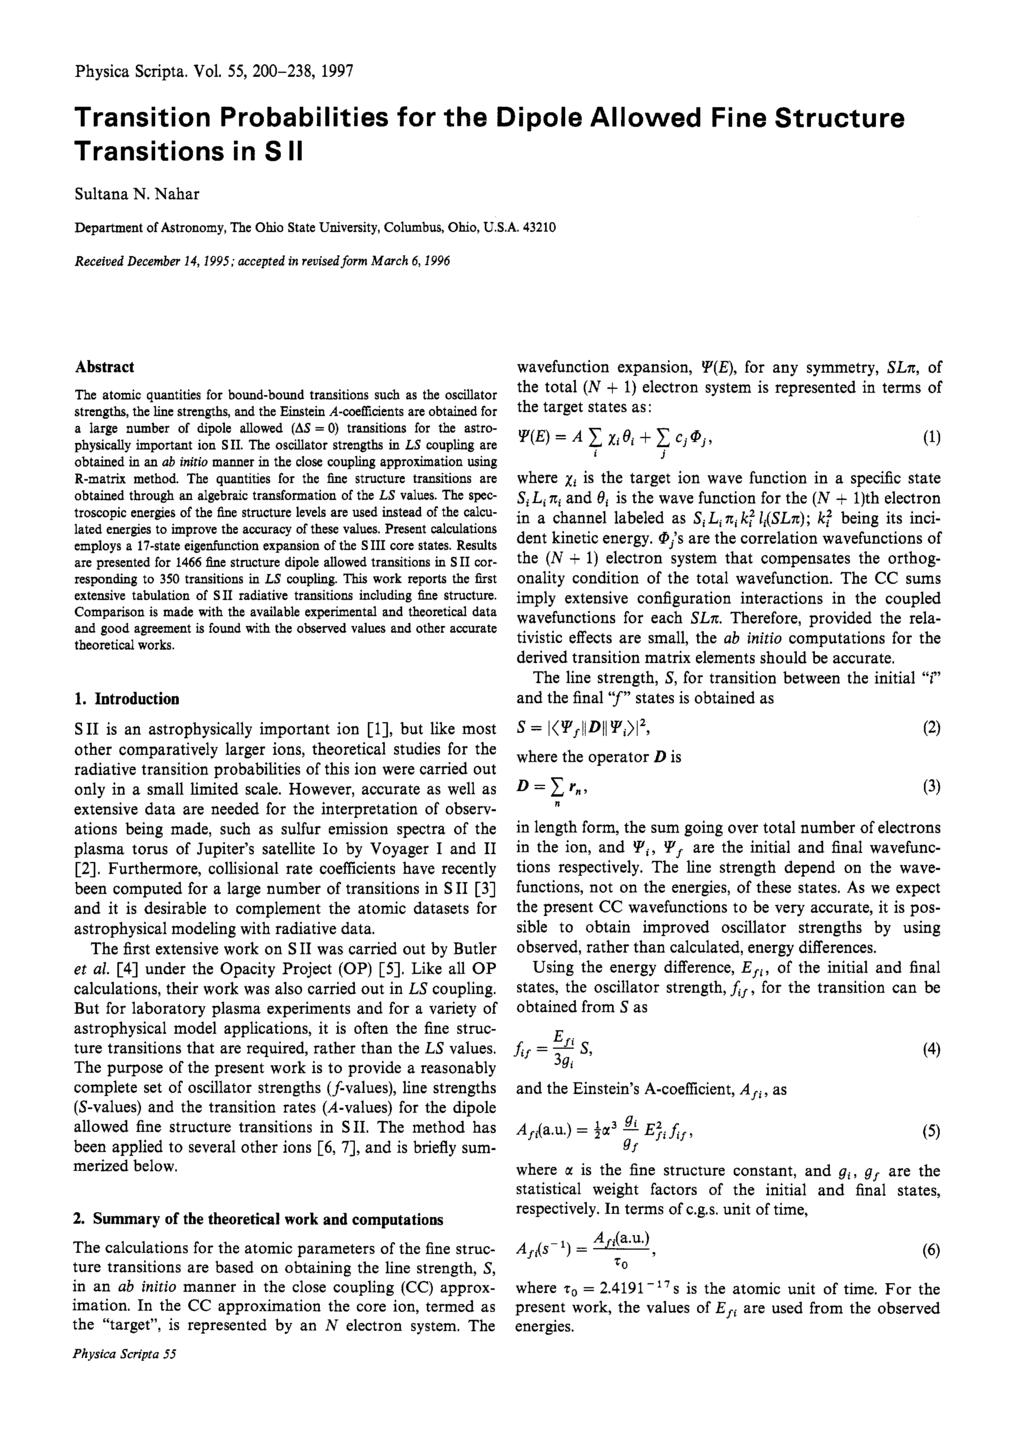 Physica Scripta. Vol. 55,00-3, 1997 Transition Probabilities for the Dipole Allowed Fine Structure Transitions in S II Sultana N.